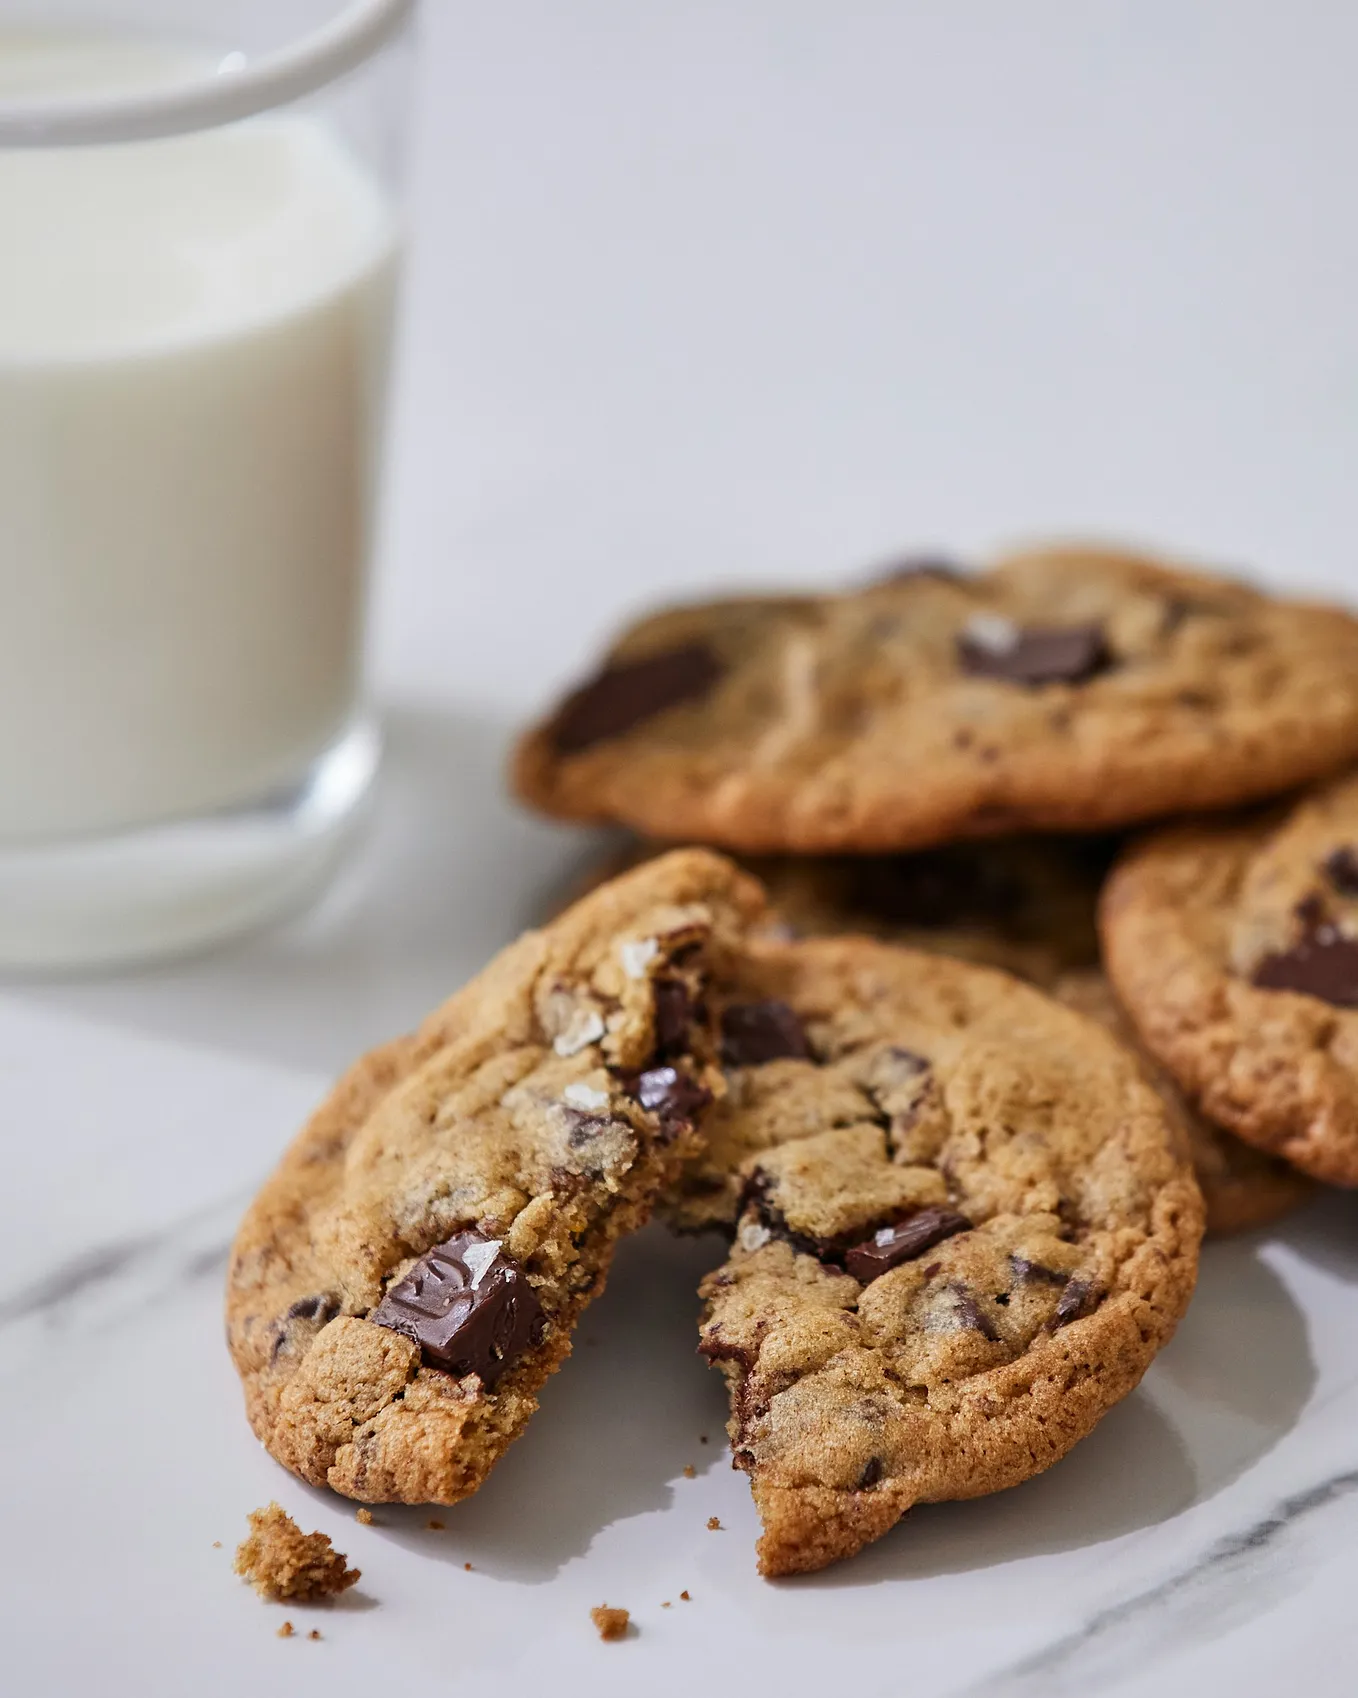 IMAGE: Three chocolate chip cookies in a plate with a glass of milk